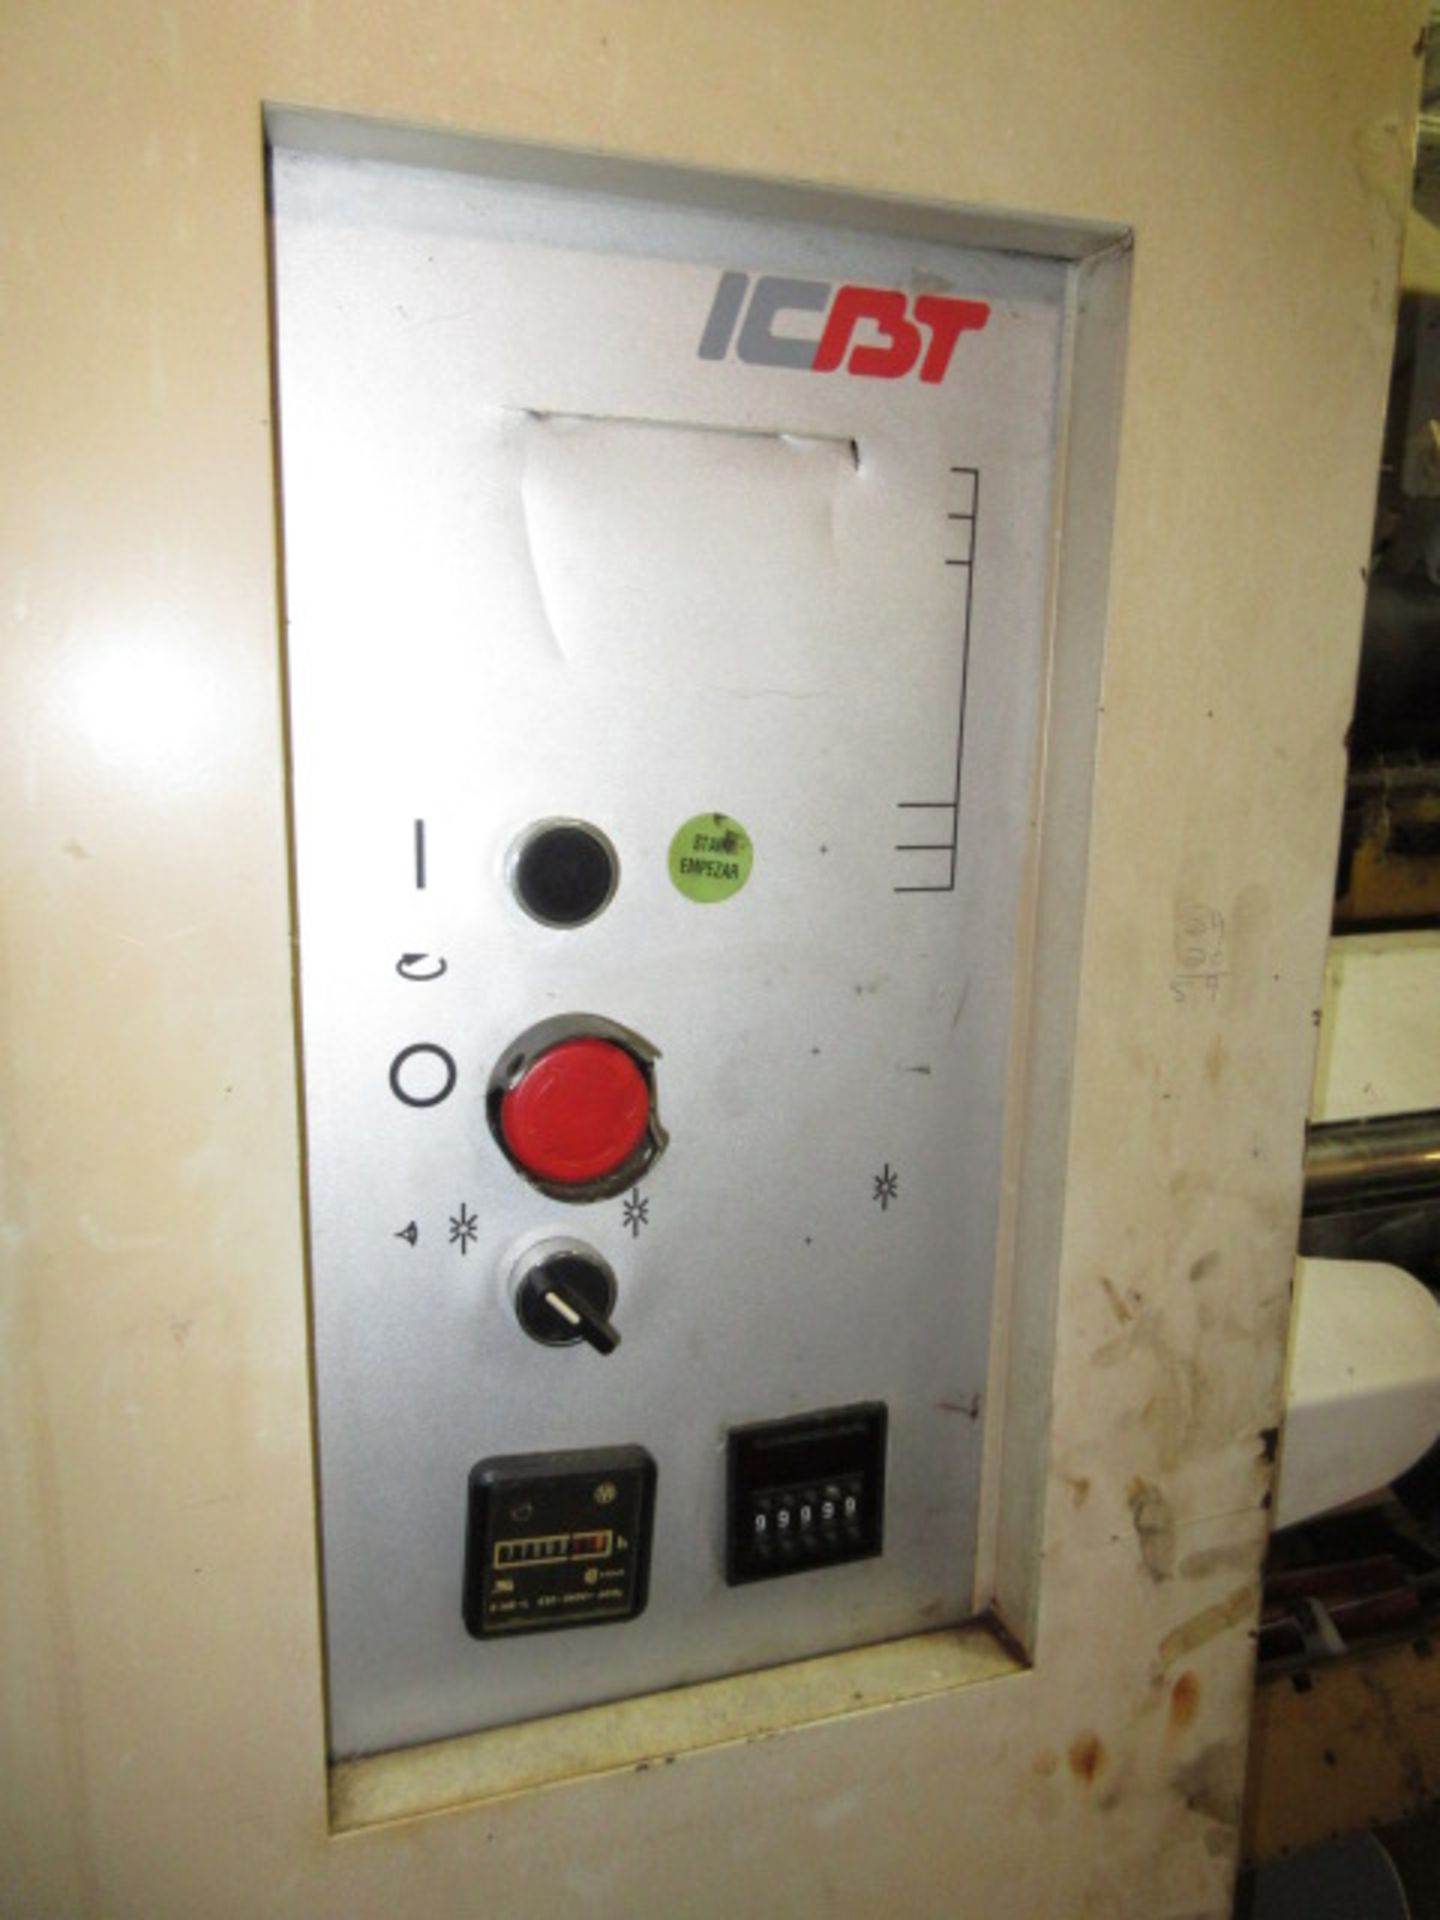 ICBT DT355 2X1 Twister, (1988), 120 spindles, parts machine, not running condition. SN# 88098-15 & - Image 3 of 8